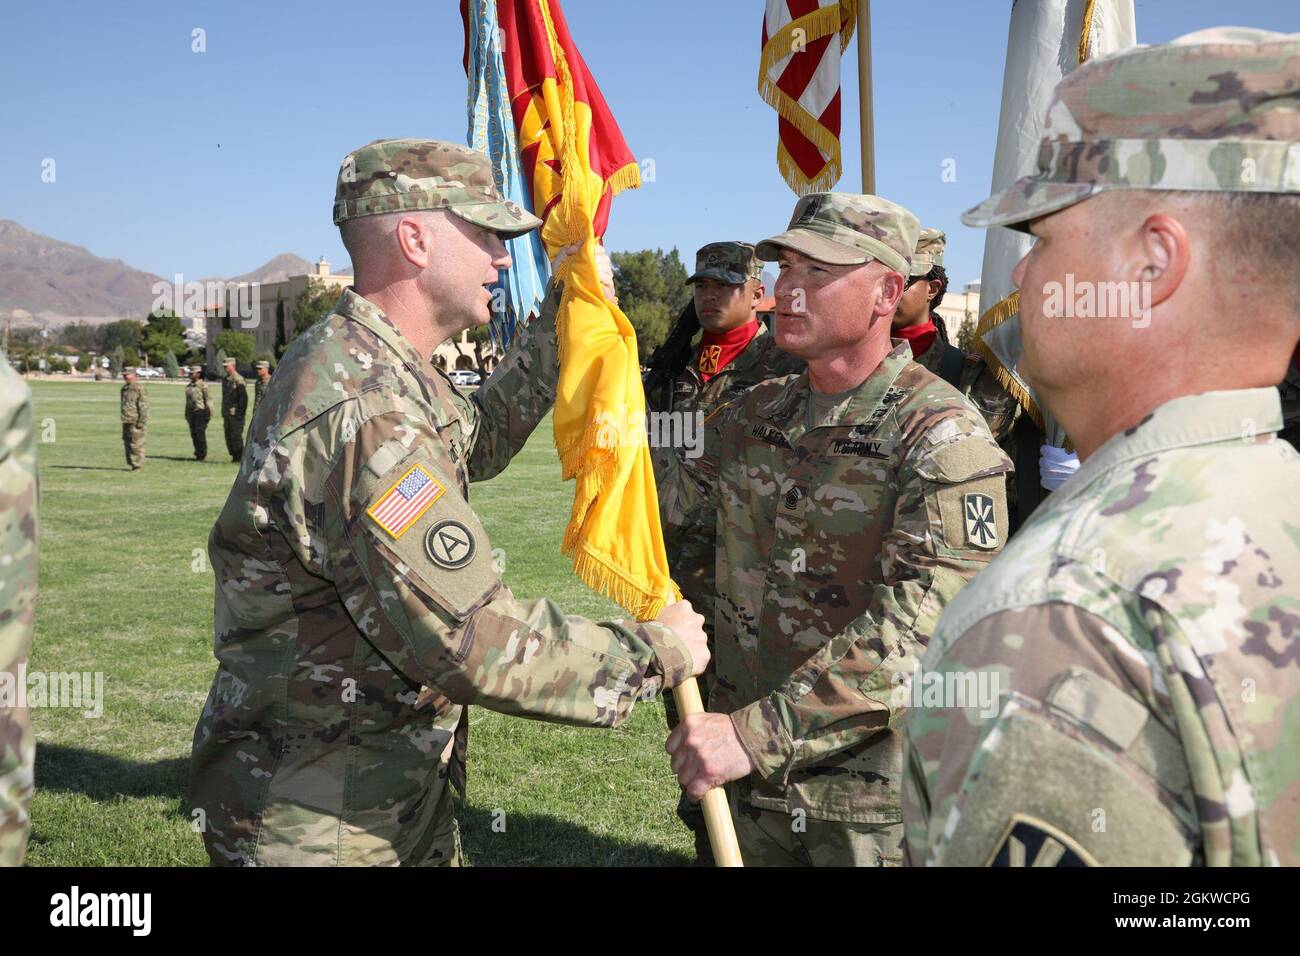 Col. Timothy L. Woodruff, incoming brigade commander, 11th Air Defense Artillery Brigade, 32d Army Air and Missile Defense Command, hands off the Brigade guidon to Command Sgt. Maj. Robert Walker during the change of command ceremony. Col. John L. Dawber, outgoing commander, 11th ADA BDE, relinquished command to Woodruff, July 9, 2021, on Noel Parade Field, Fort Bliss, Texas. Stock Photo